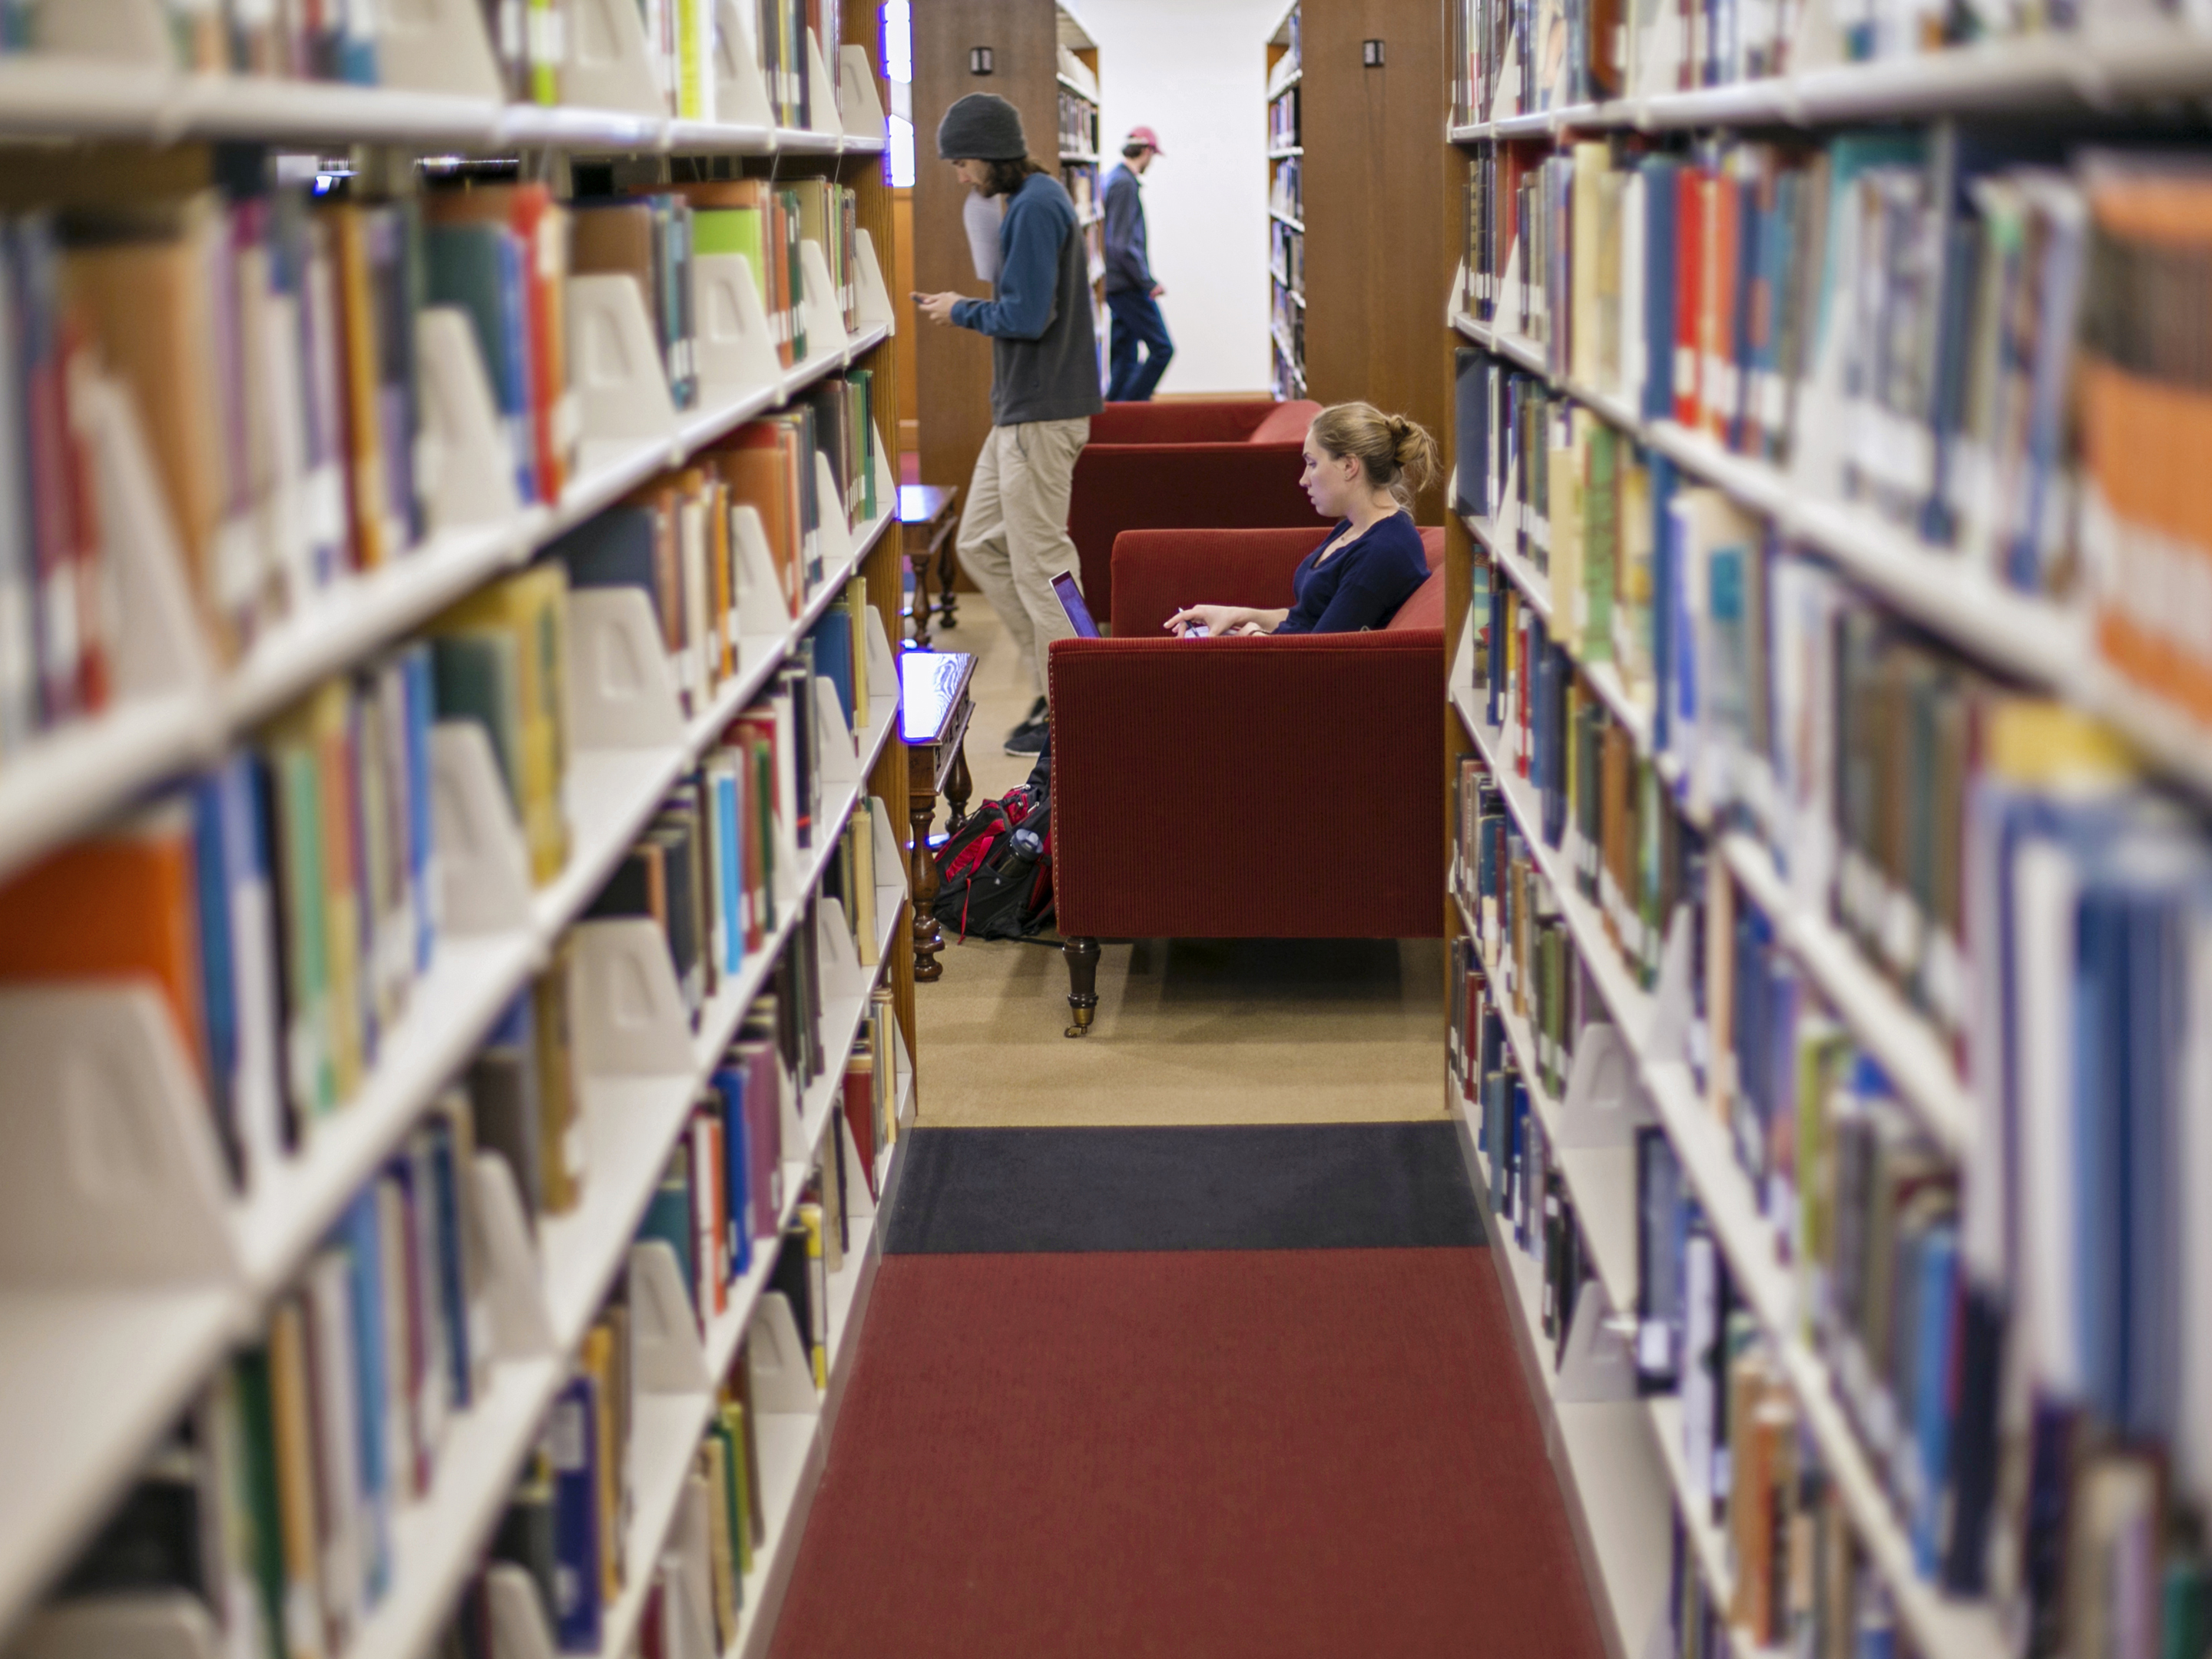 Between two rows of bookshelves, a student sits in a chair and another walks by